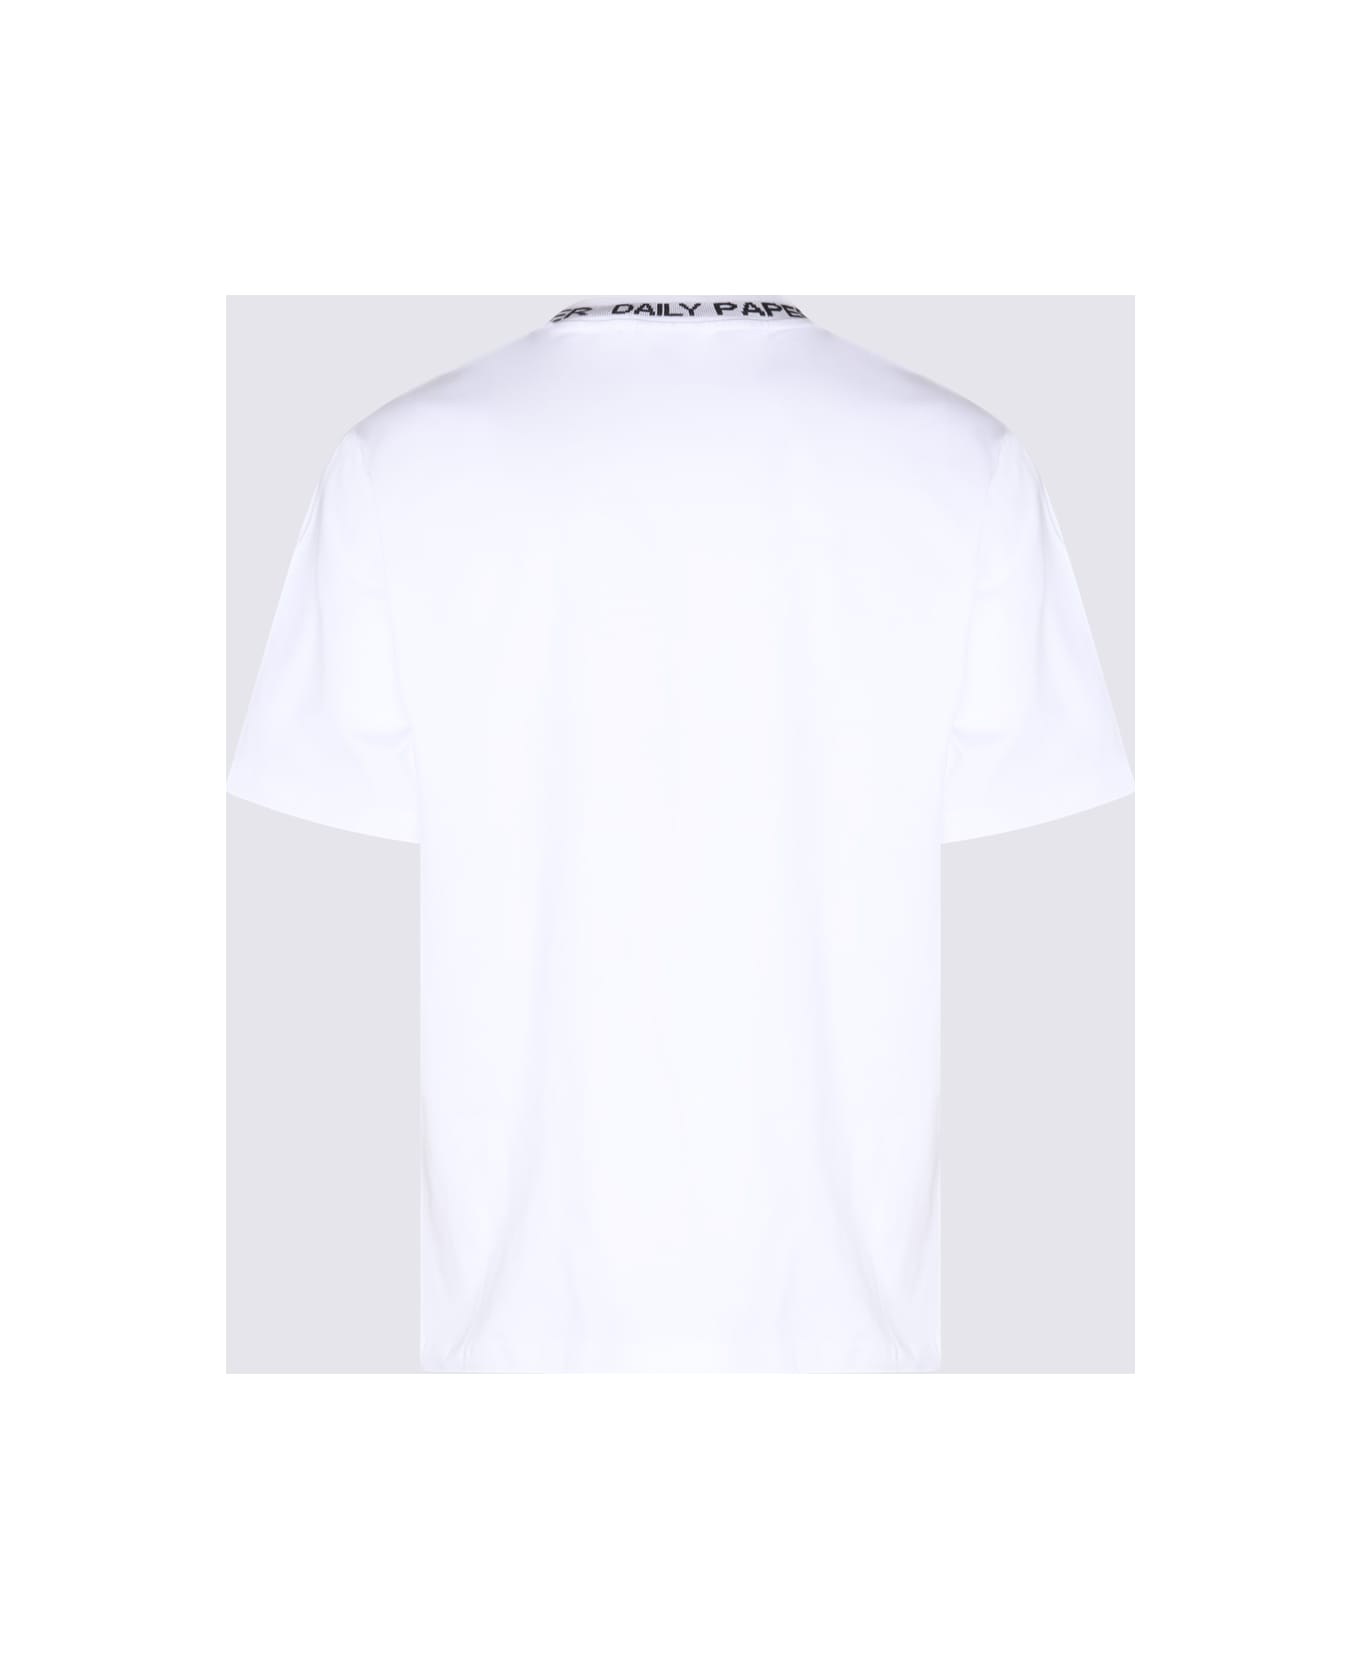 Daily Paper White And Black Cotton T-shirt - White シャツ